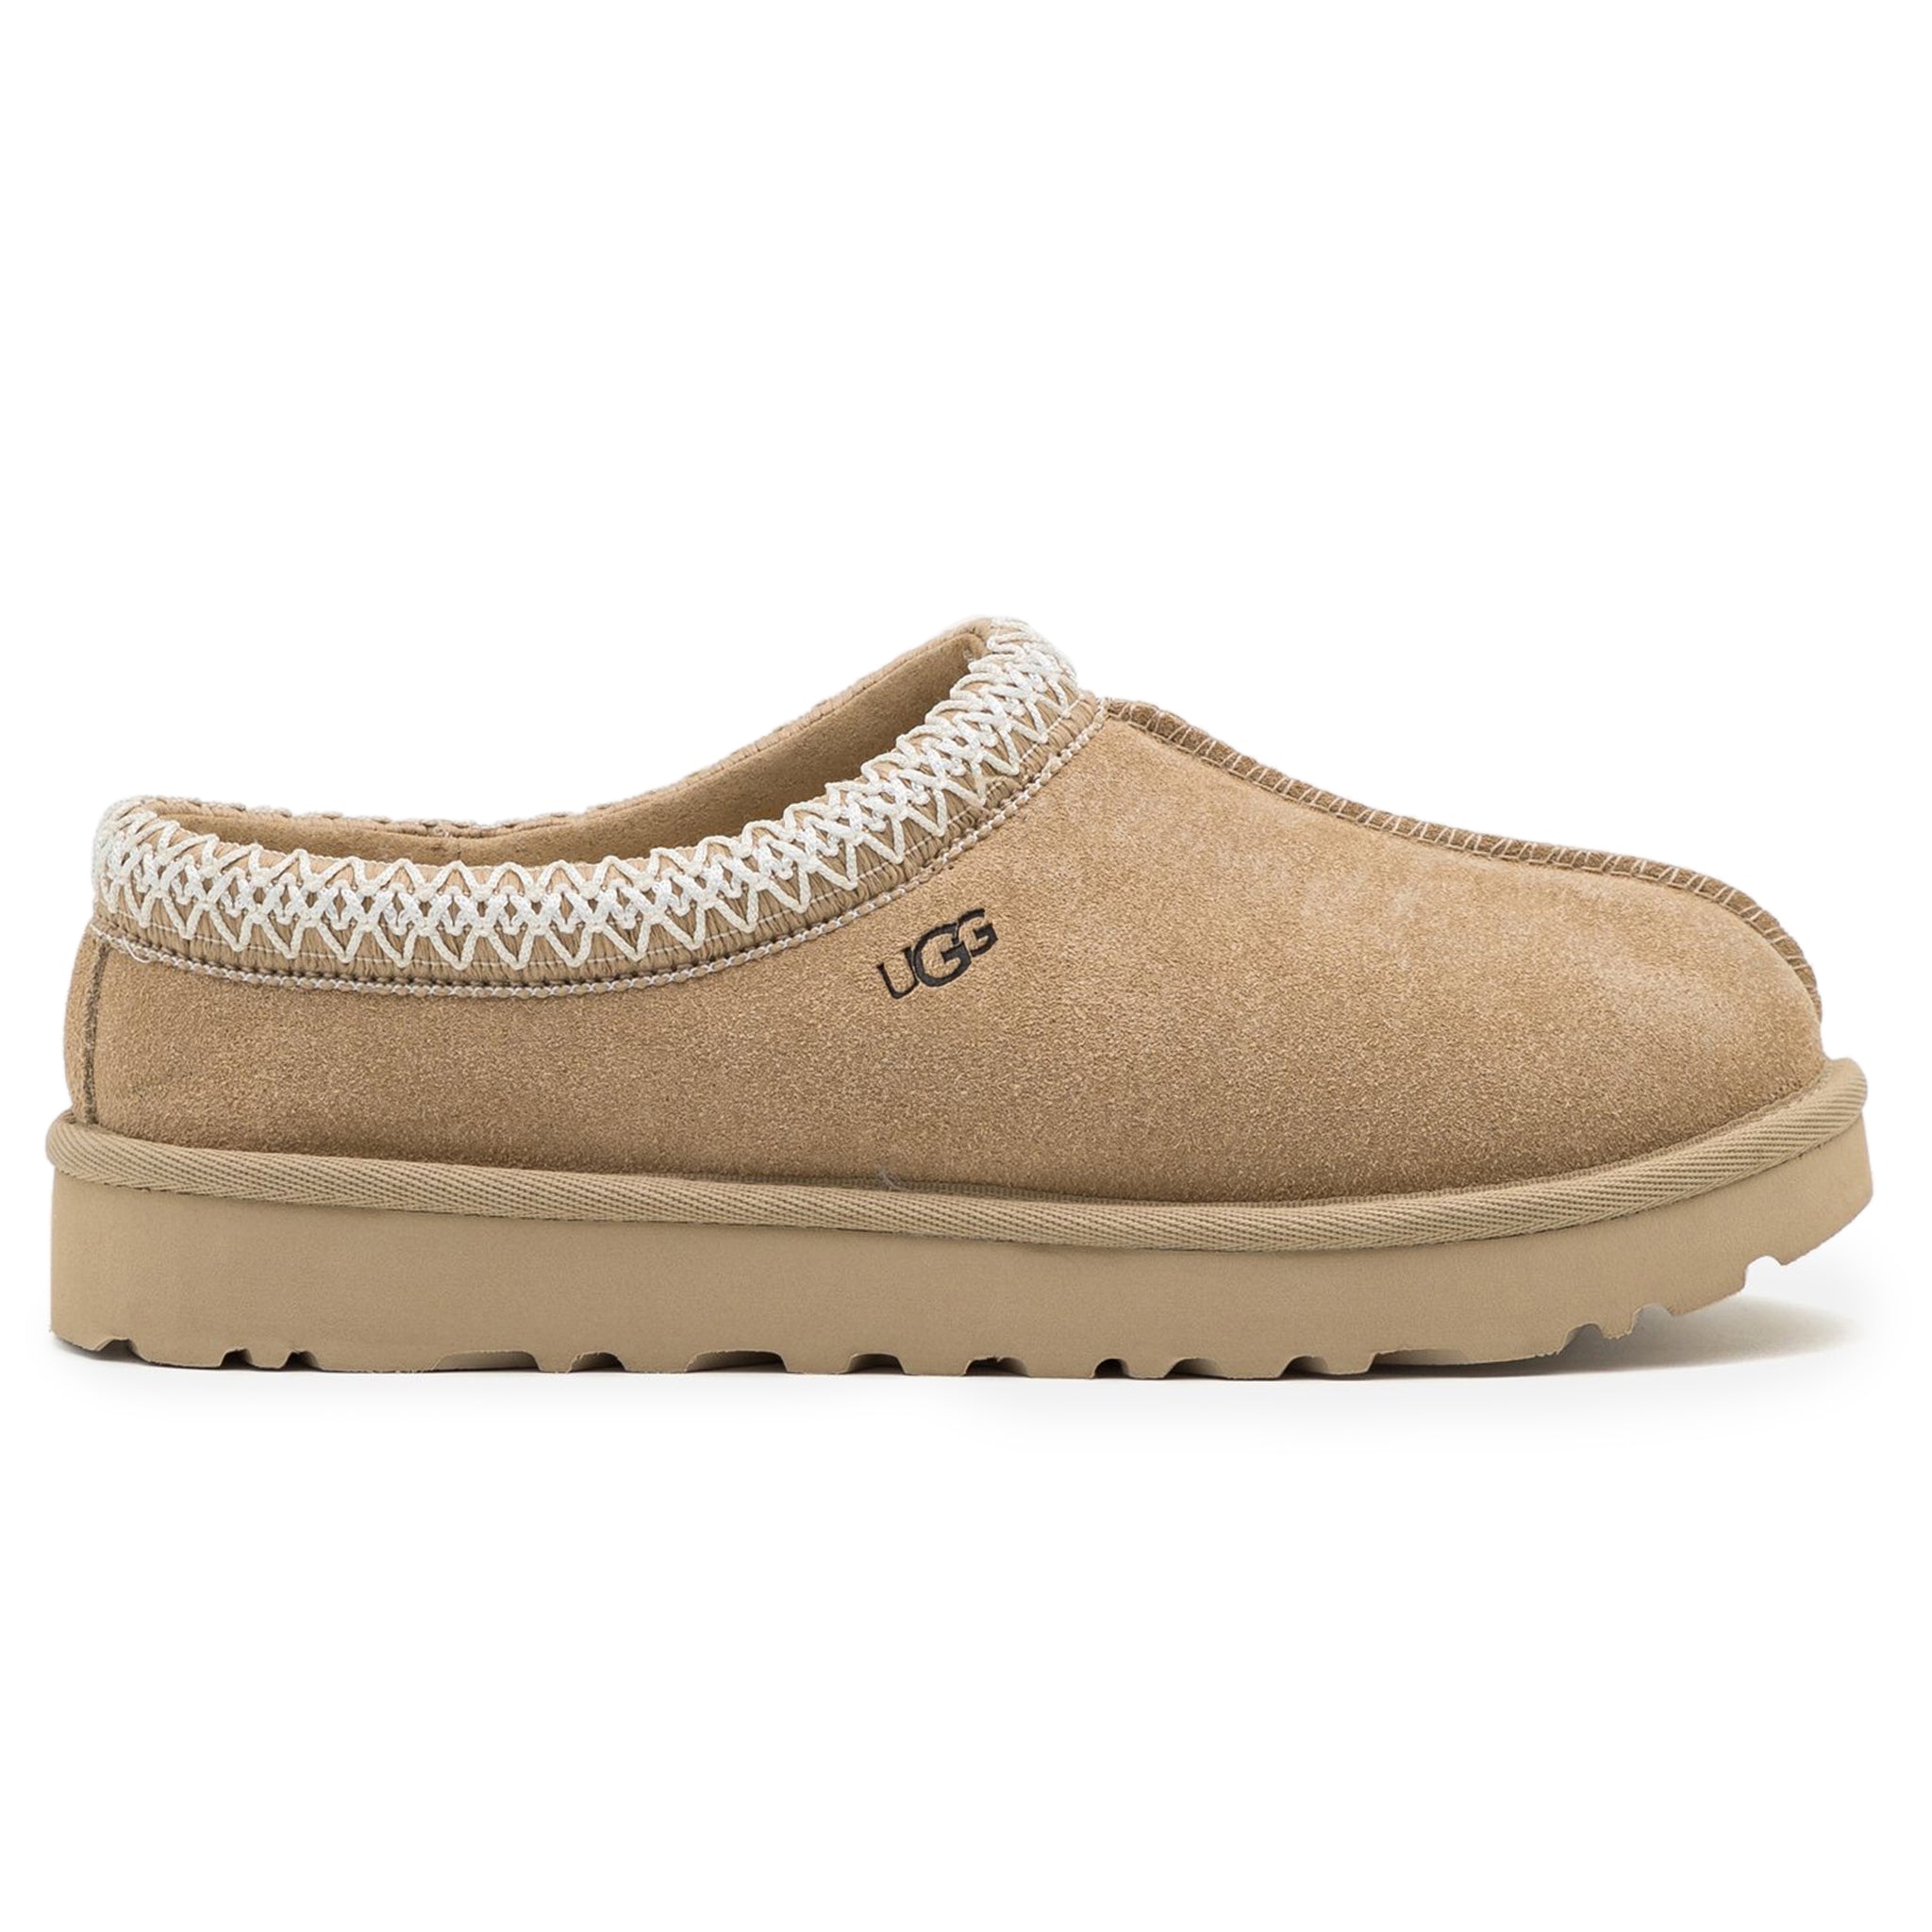 Side view of UGG Tasman Mustard Seed Slippers (W) 5955-MSWH